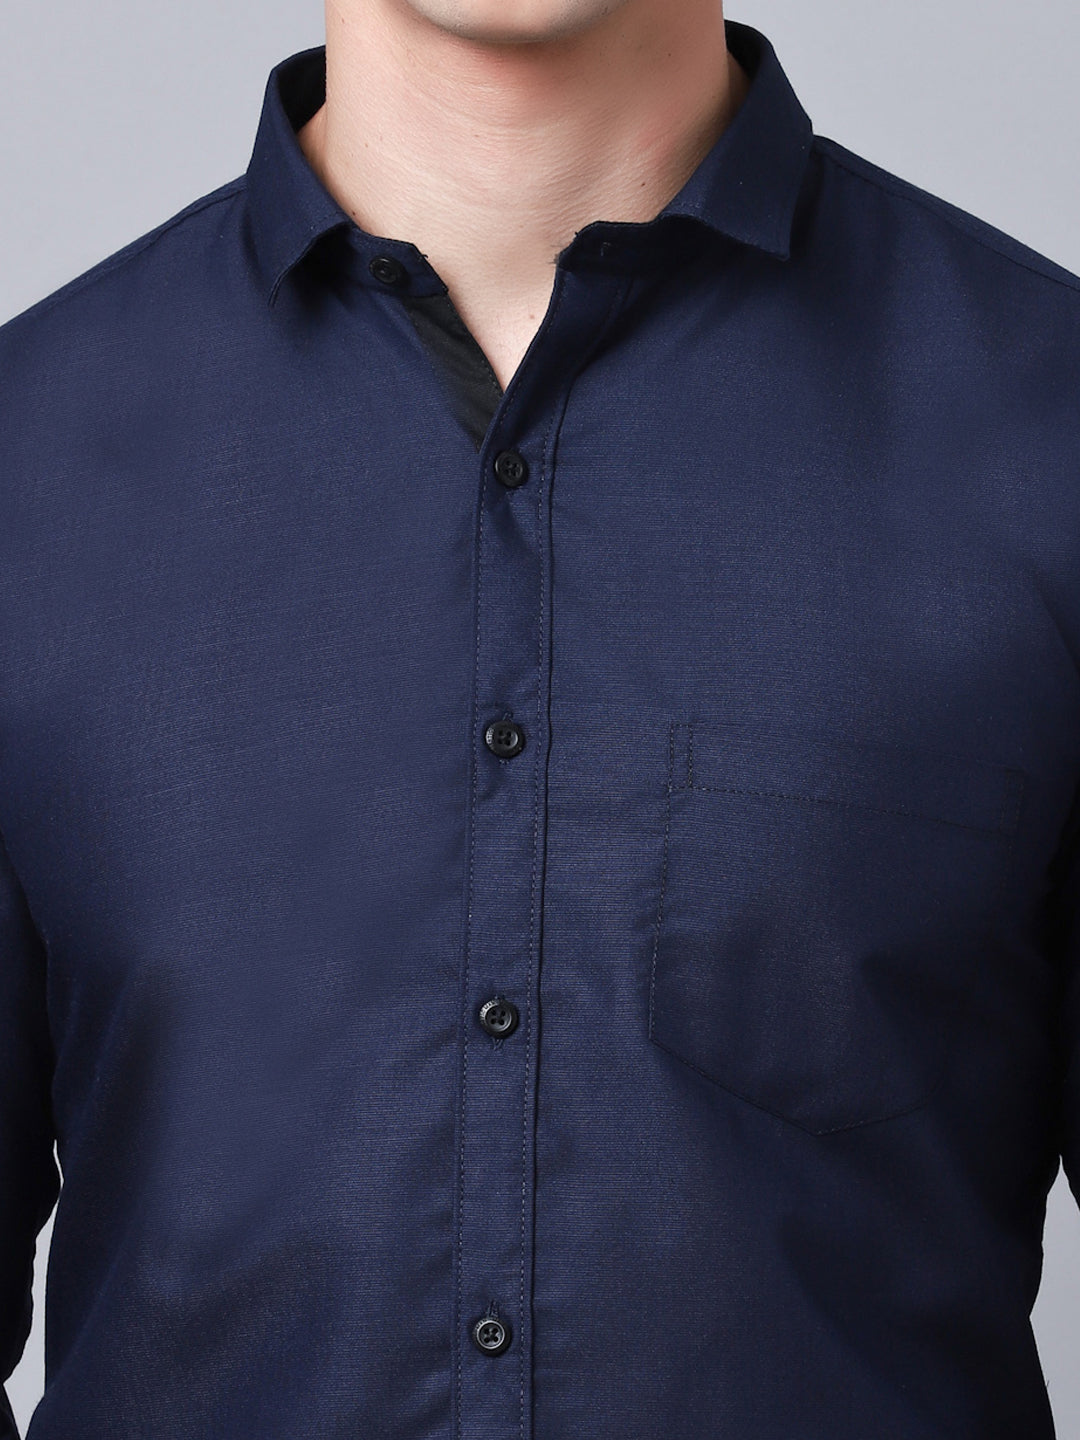 Appriciable Casual Solid Shirt - Navy Blue